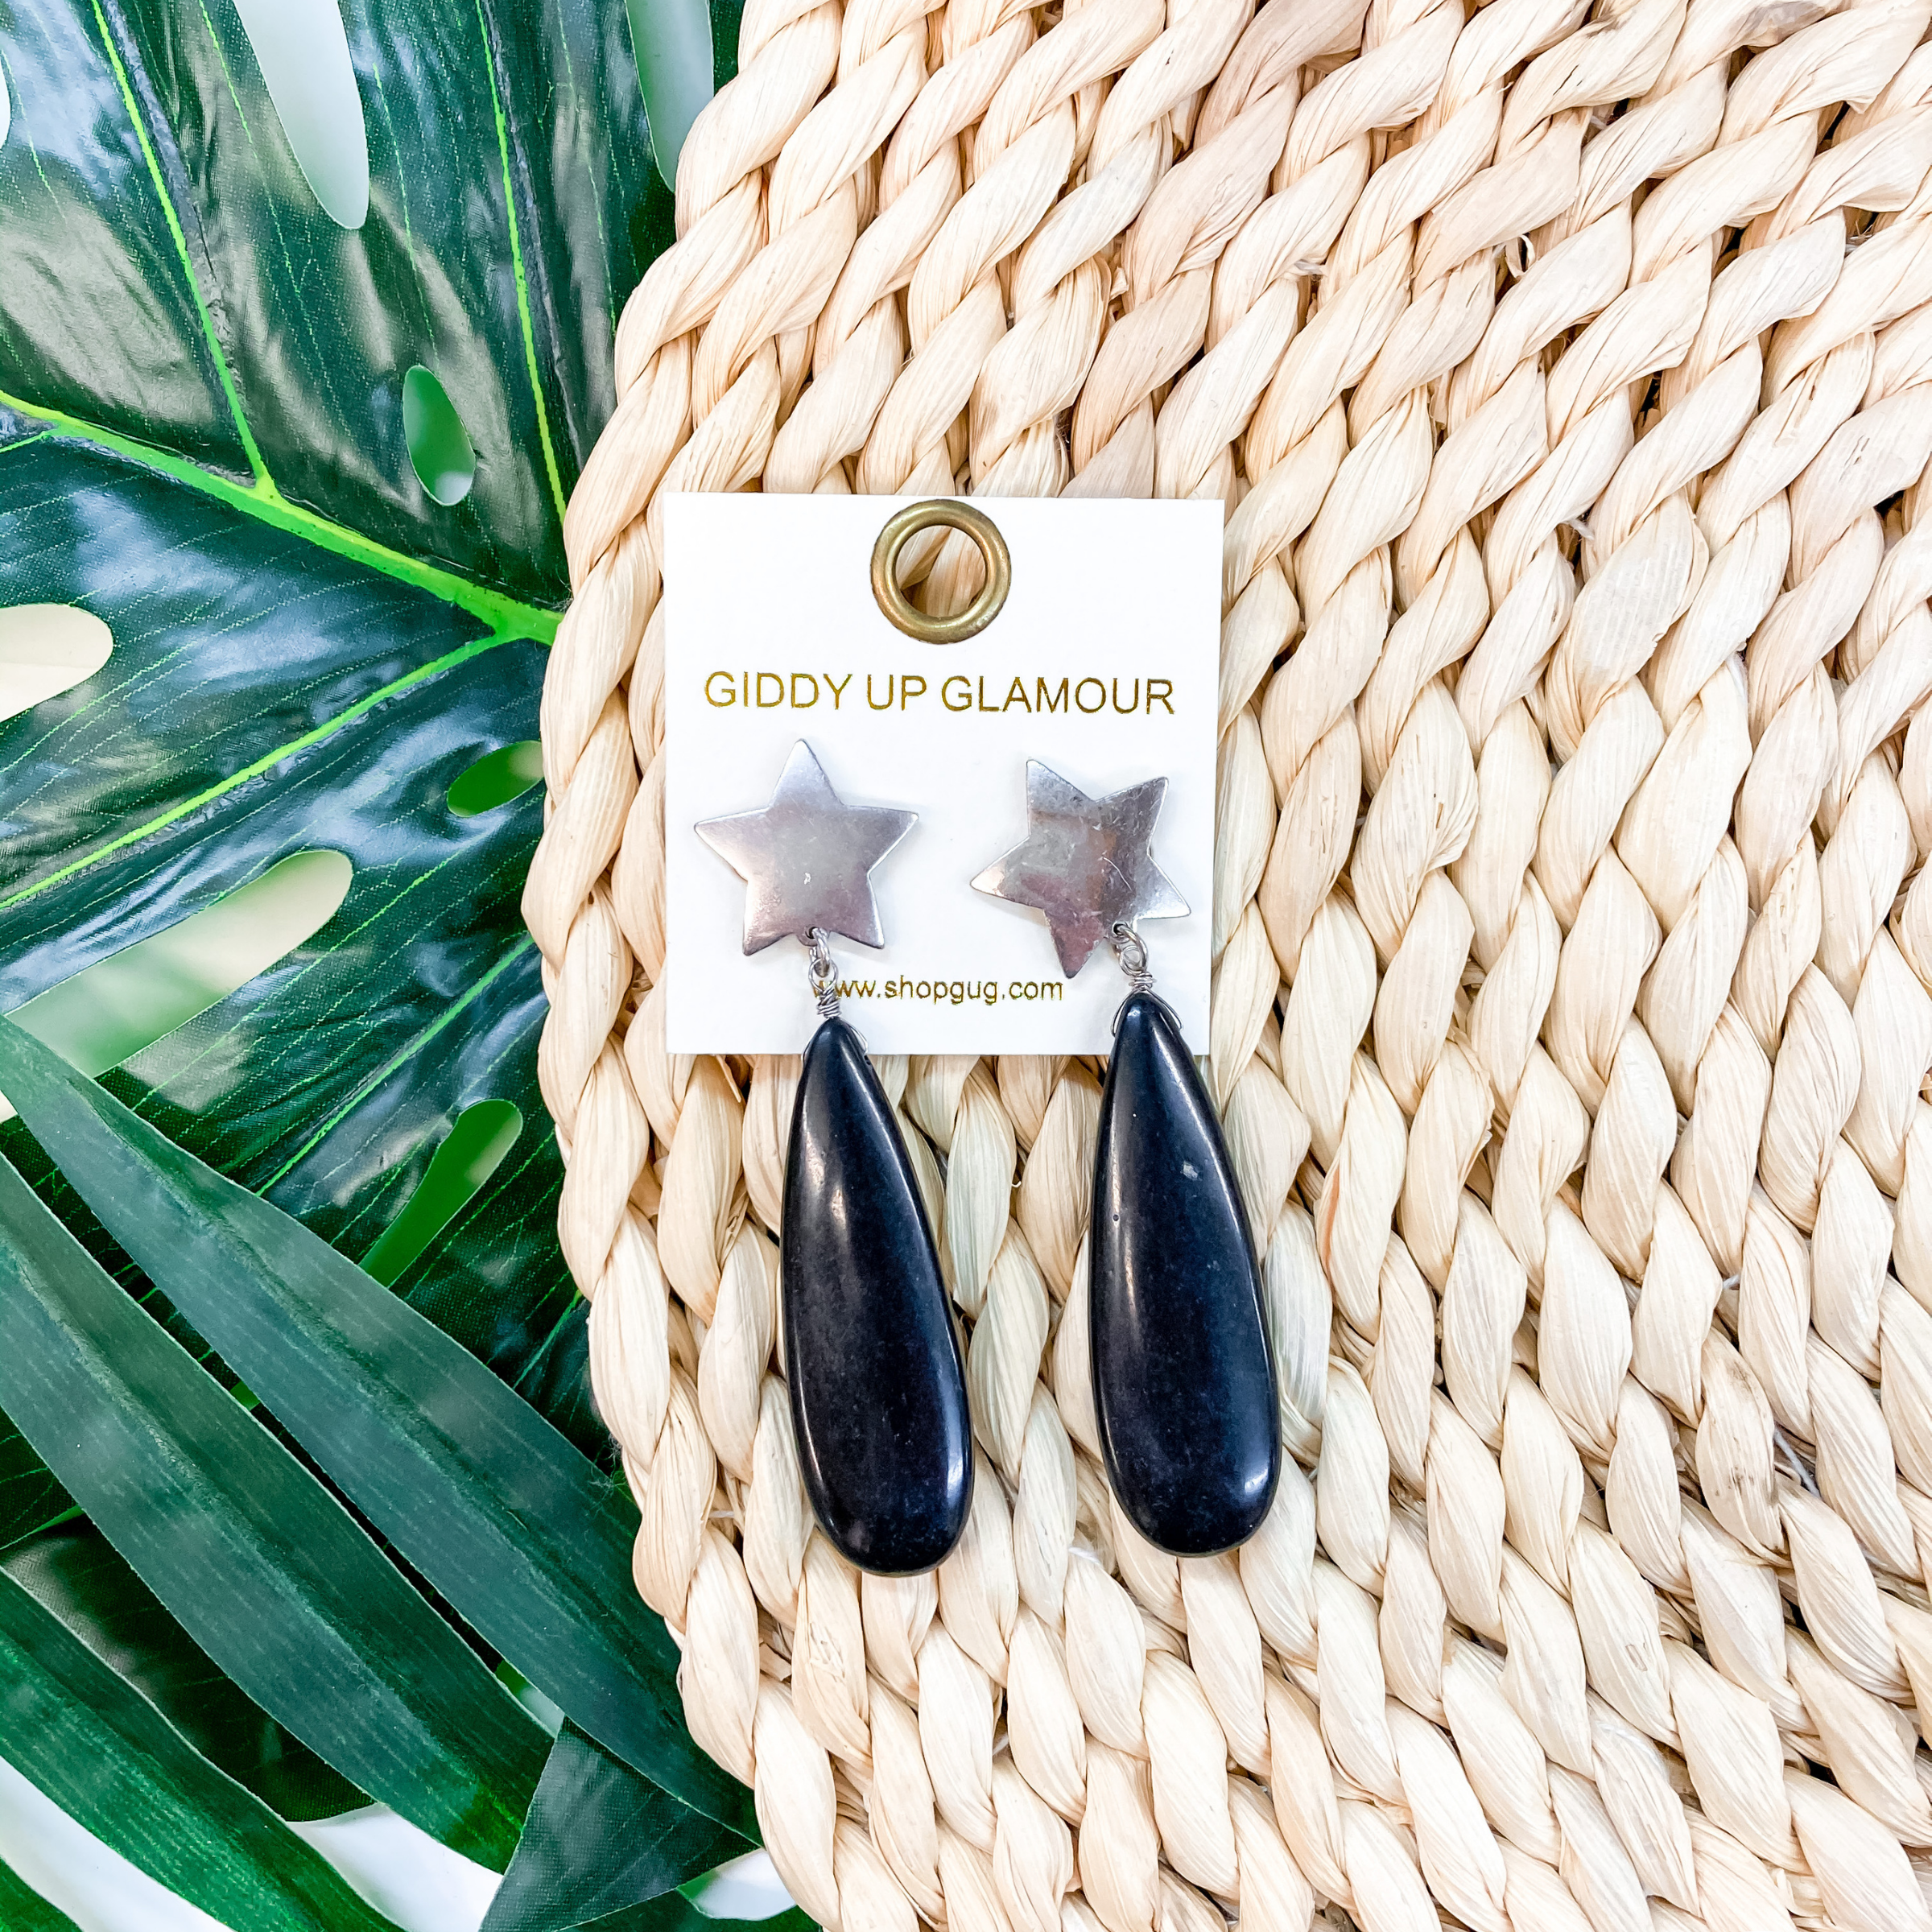 Shoot For The Stars Stone Post Earrings in Black - Giddy Up Glamour Boutique